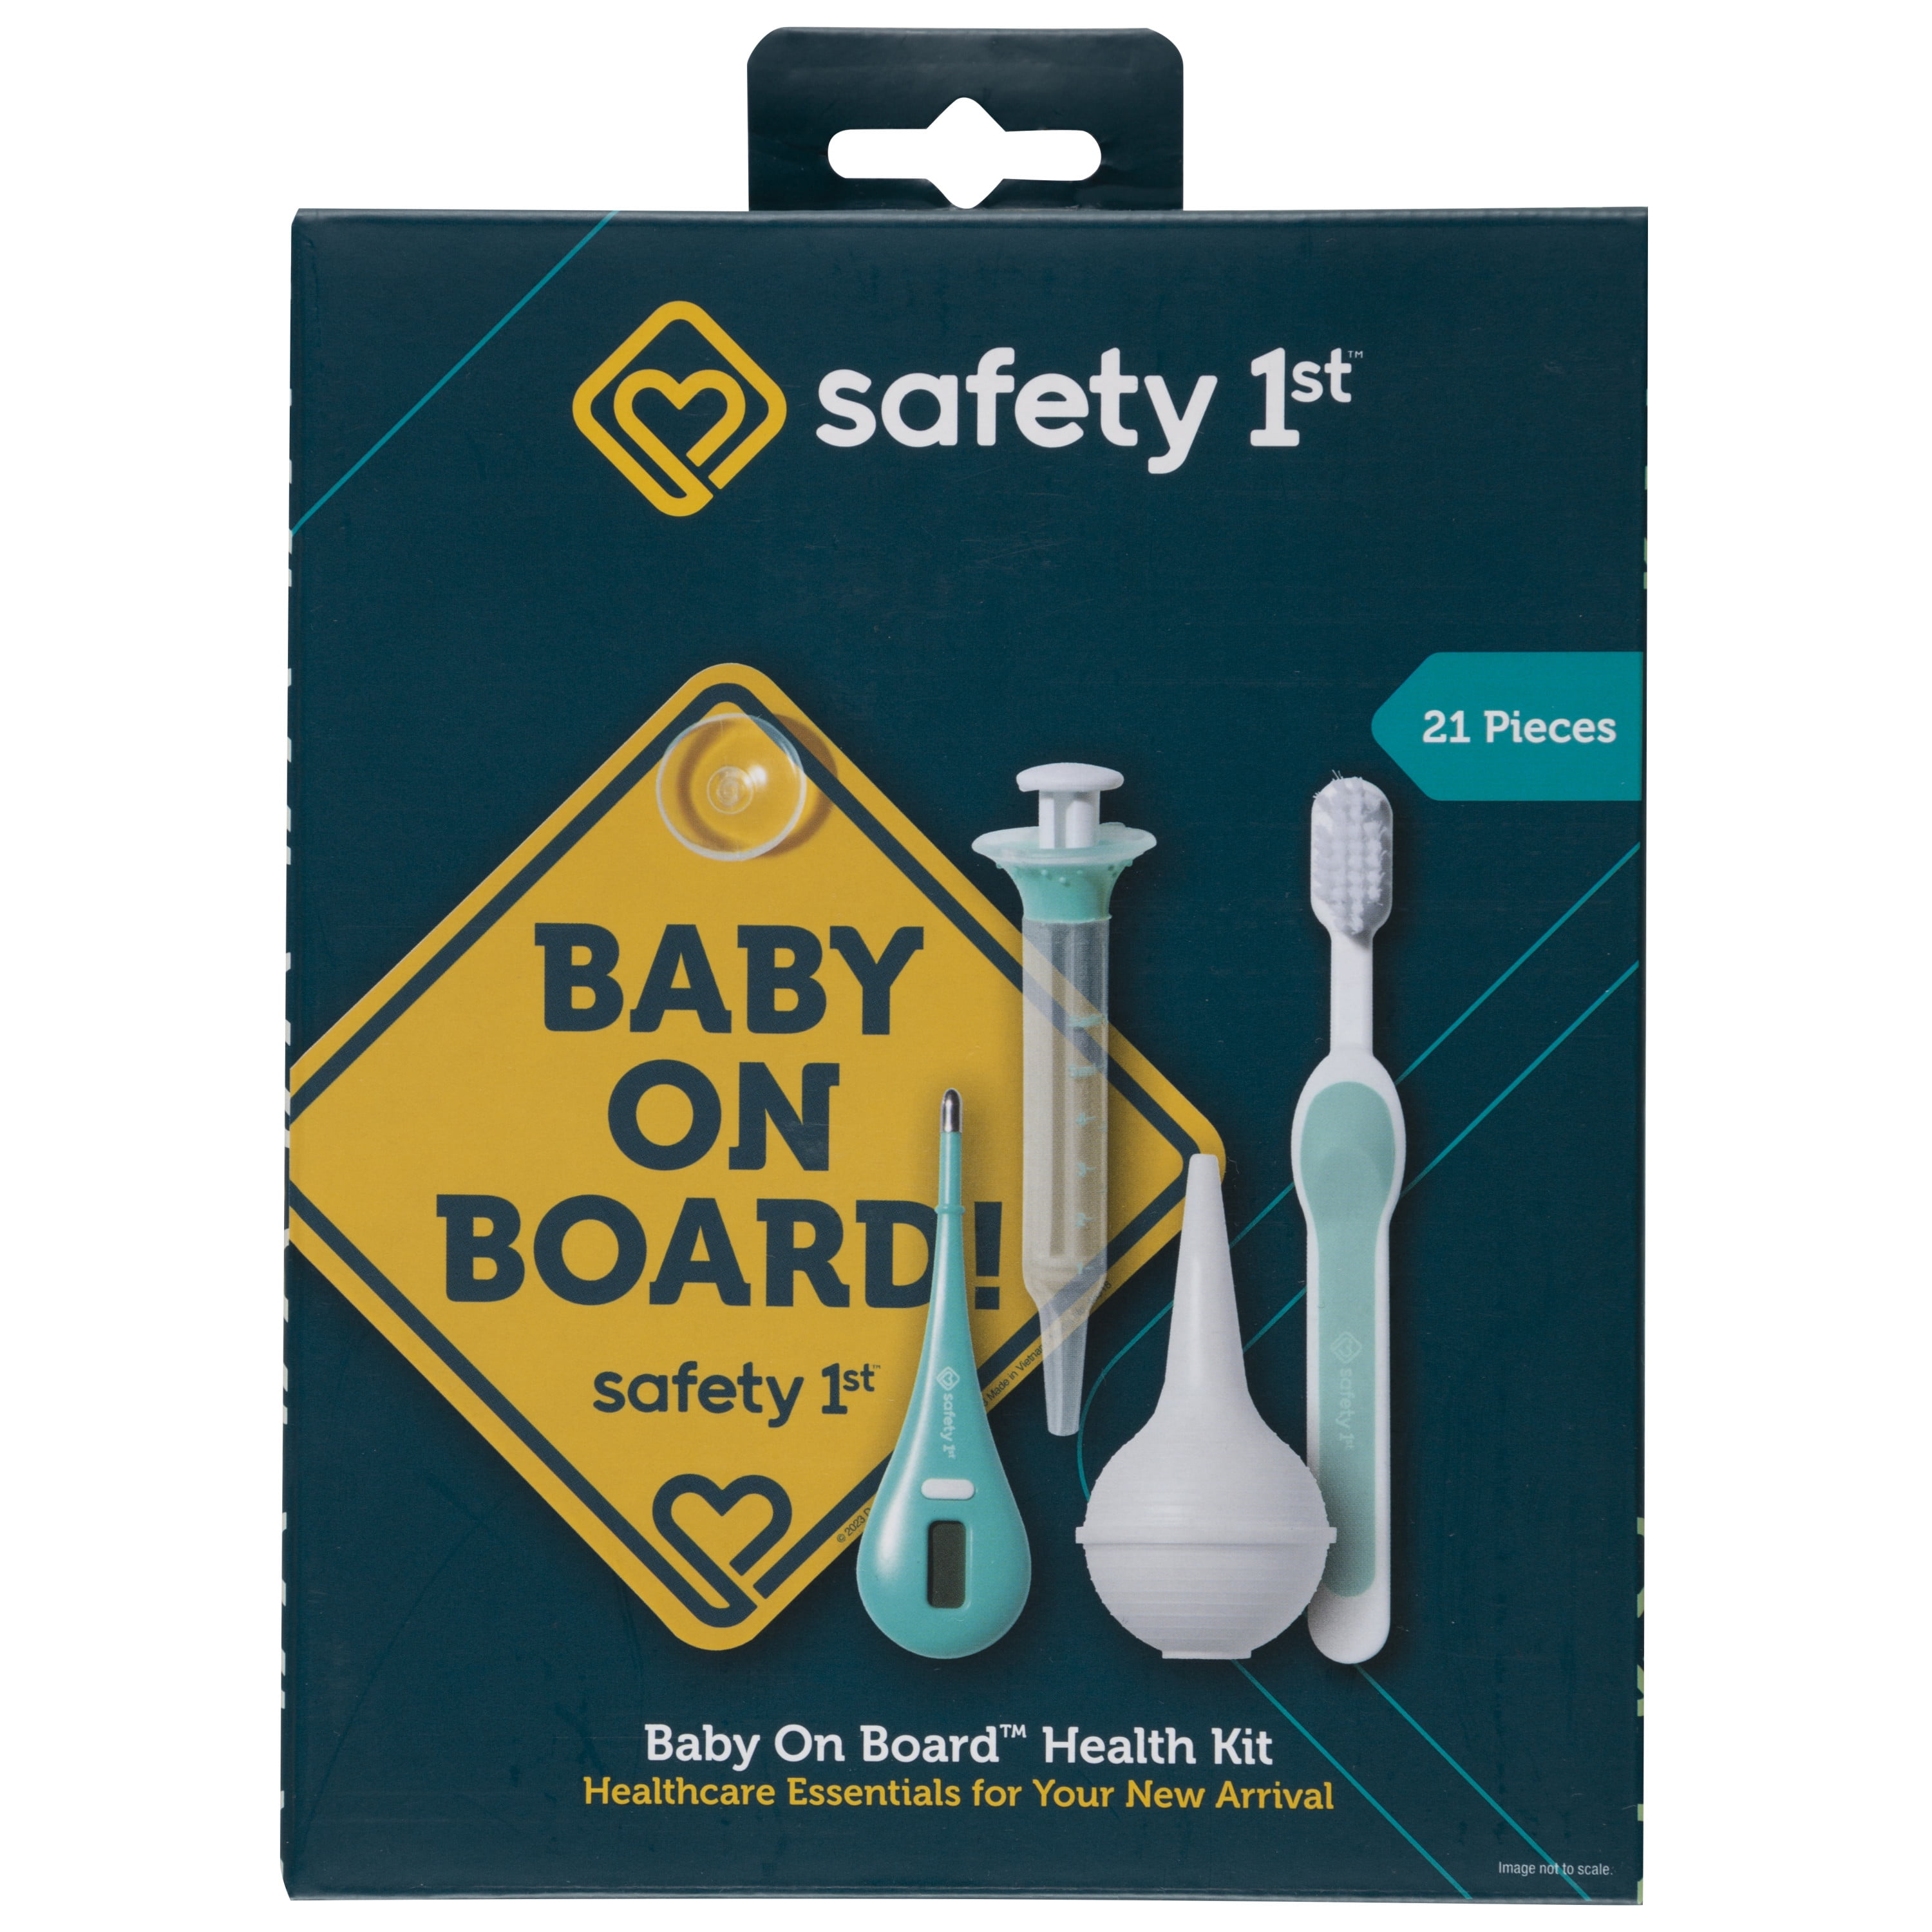 Safety 1st  Baby On Board® Sign